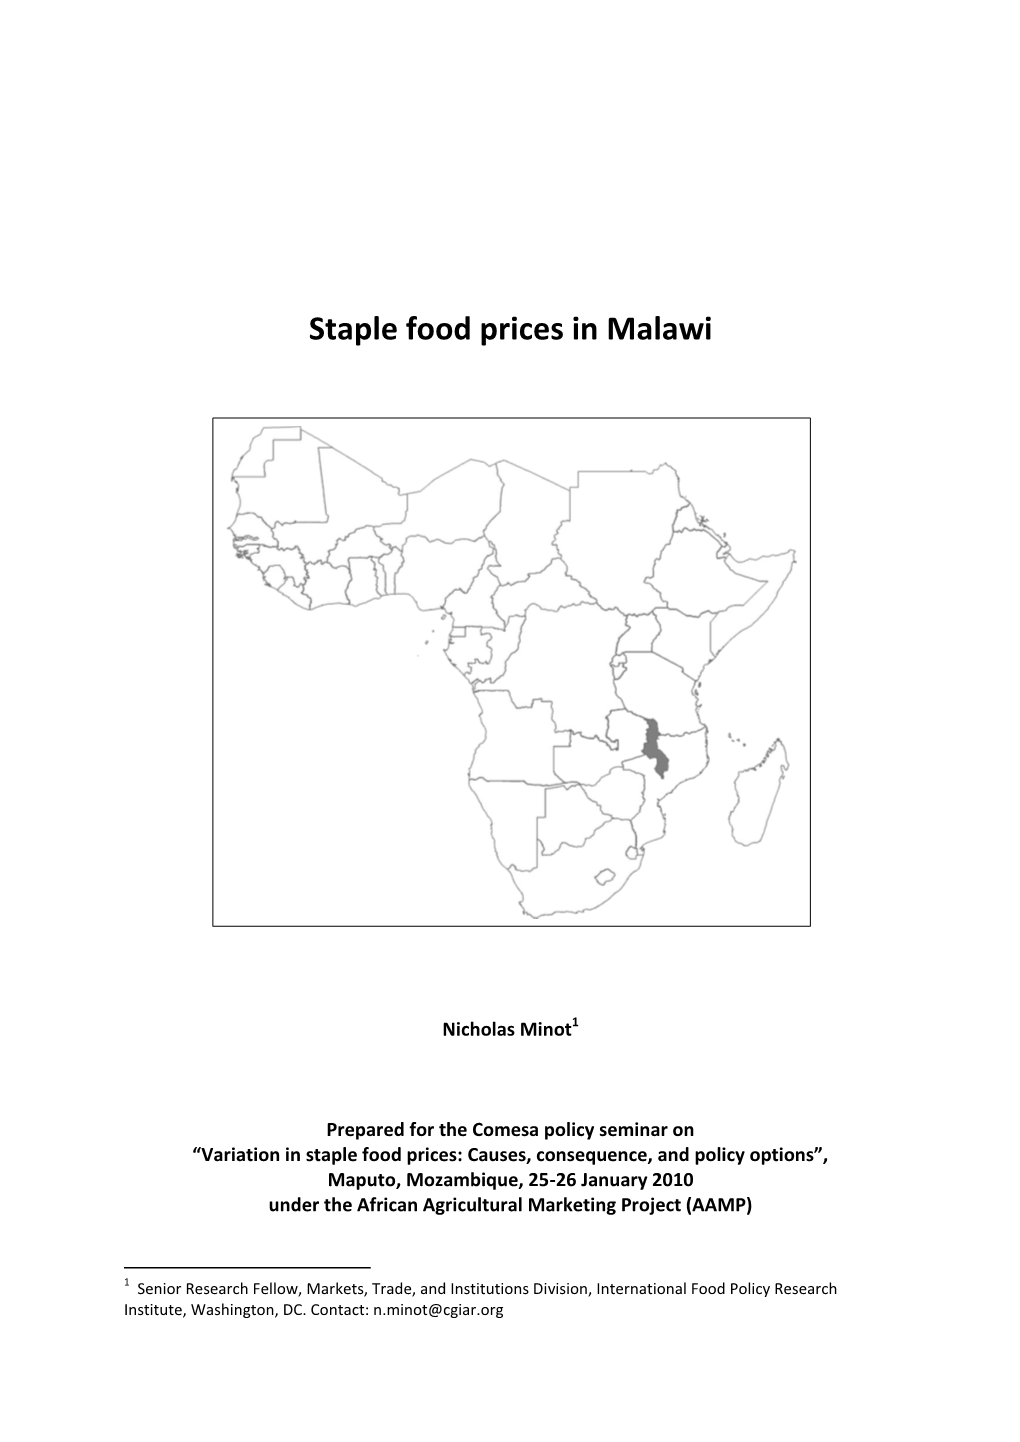 Staple Food Prices in Malawi